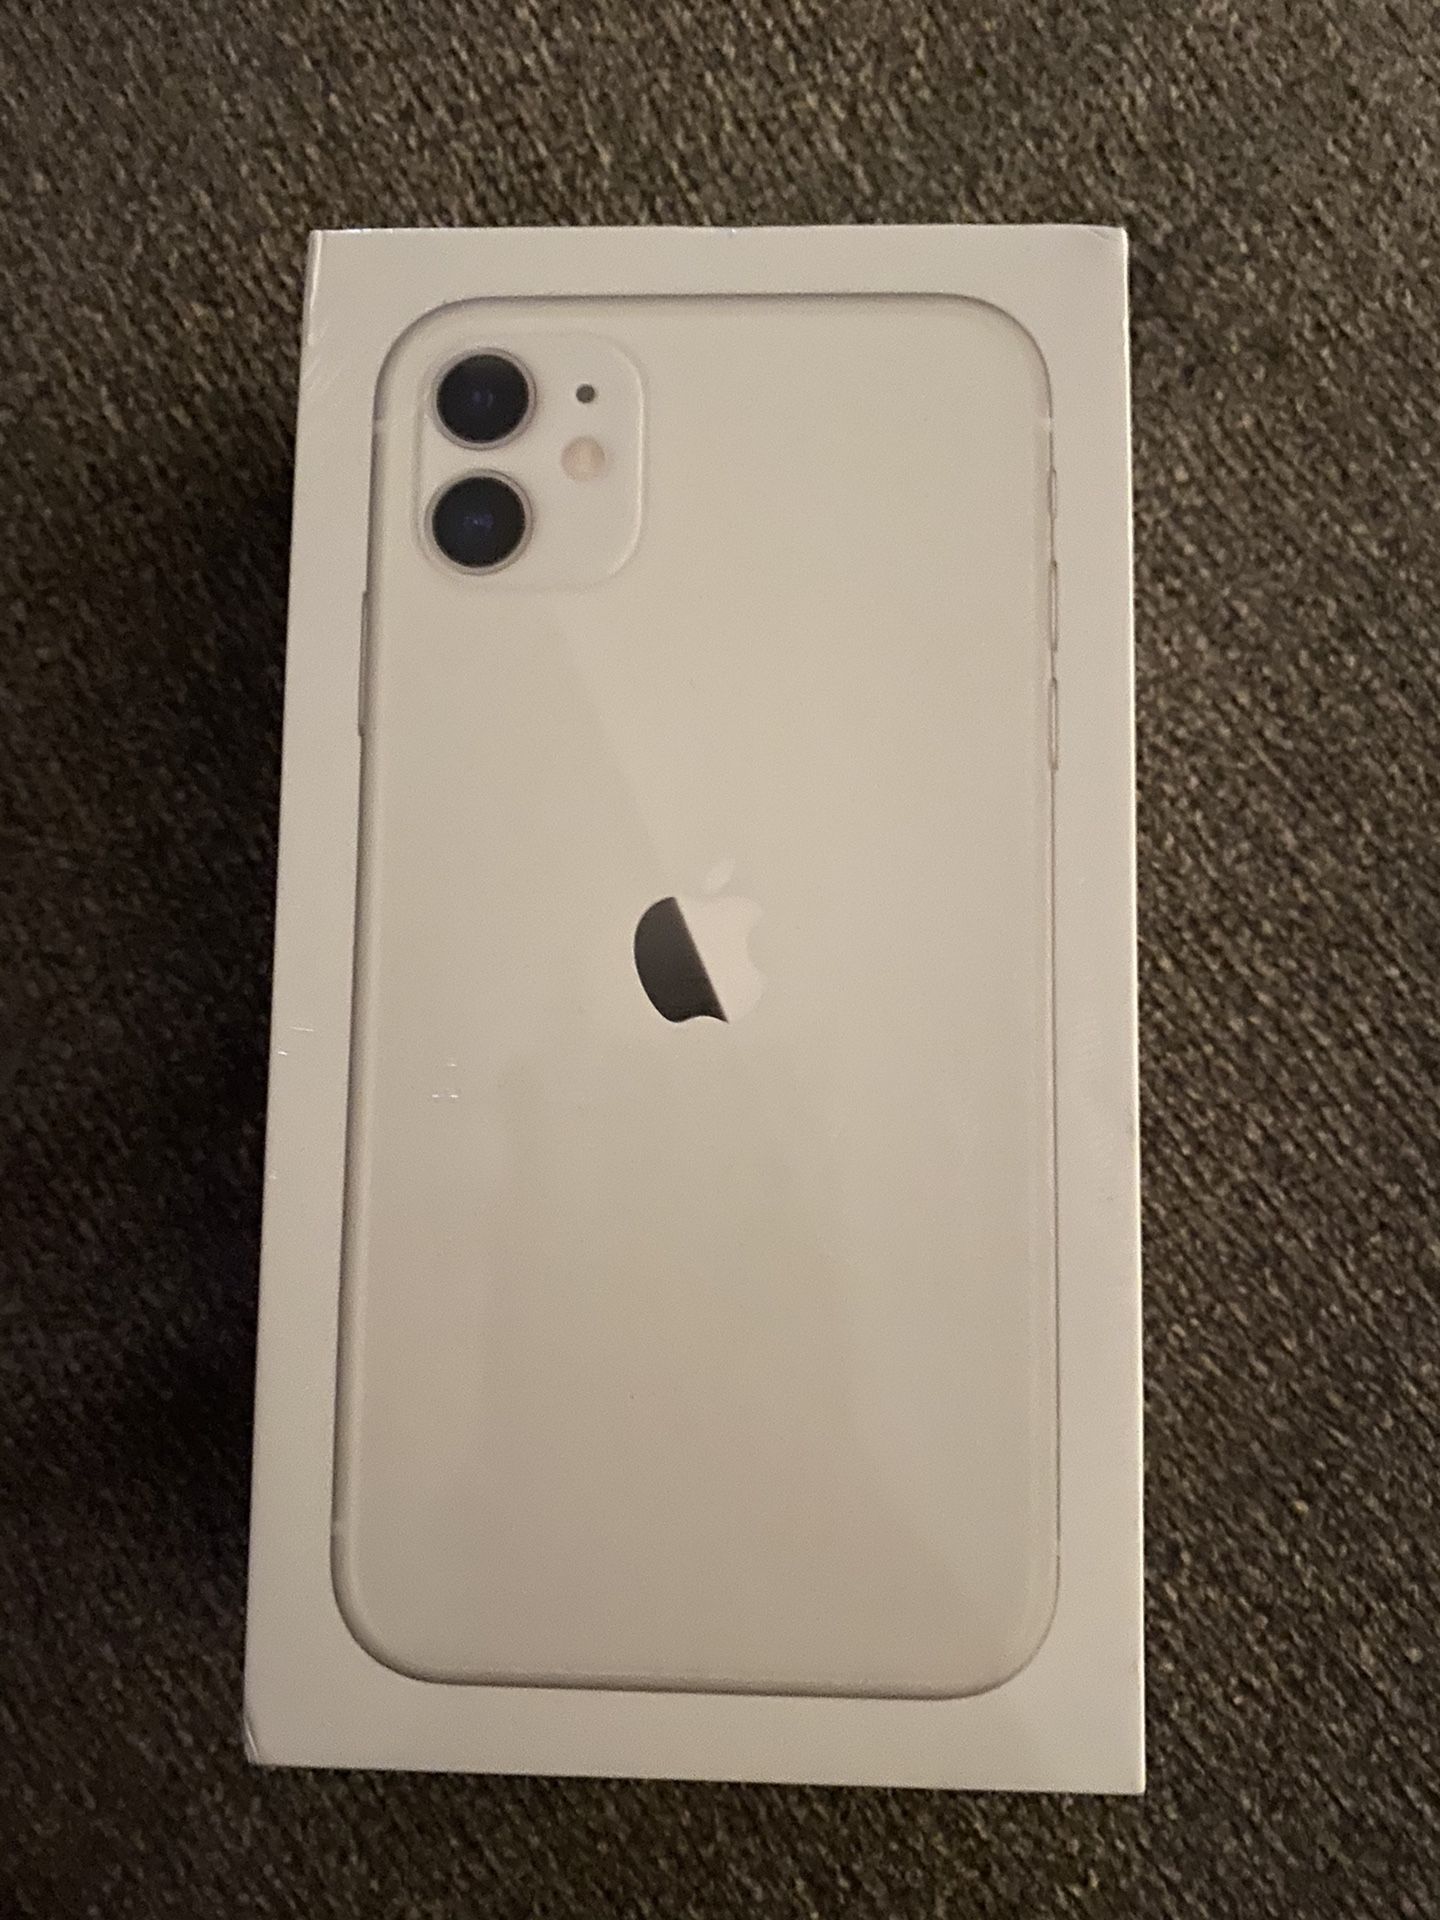 iPhone 11 brand new sealed white 64GB AT&T and CRICKET only